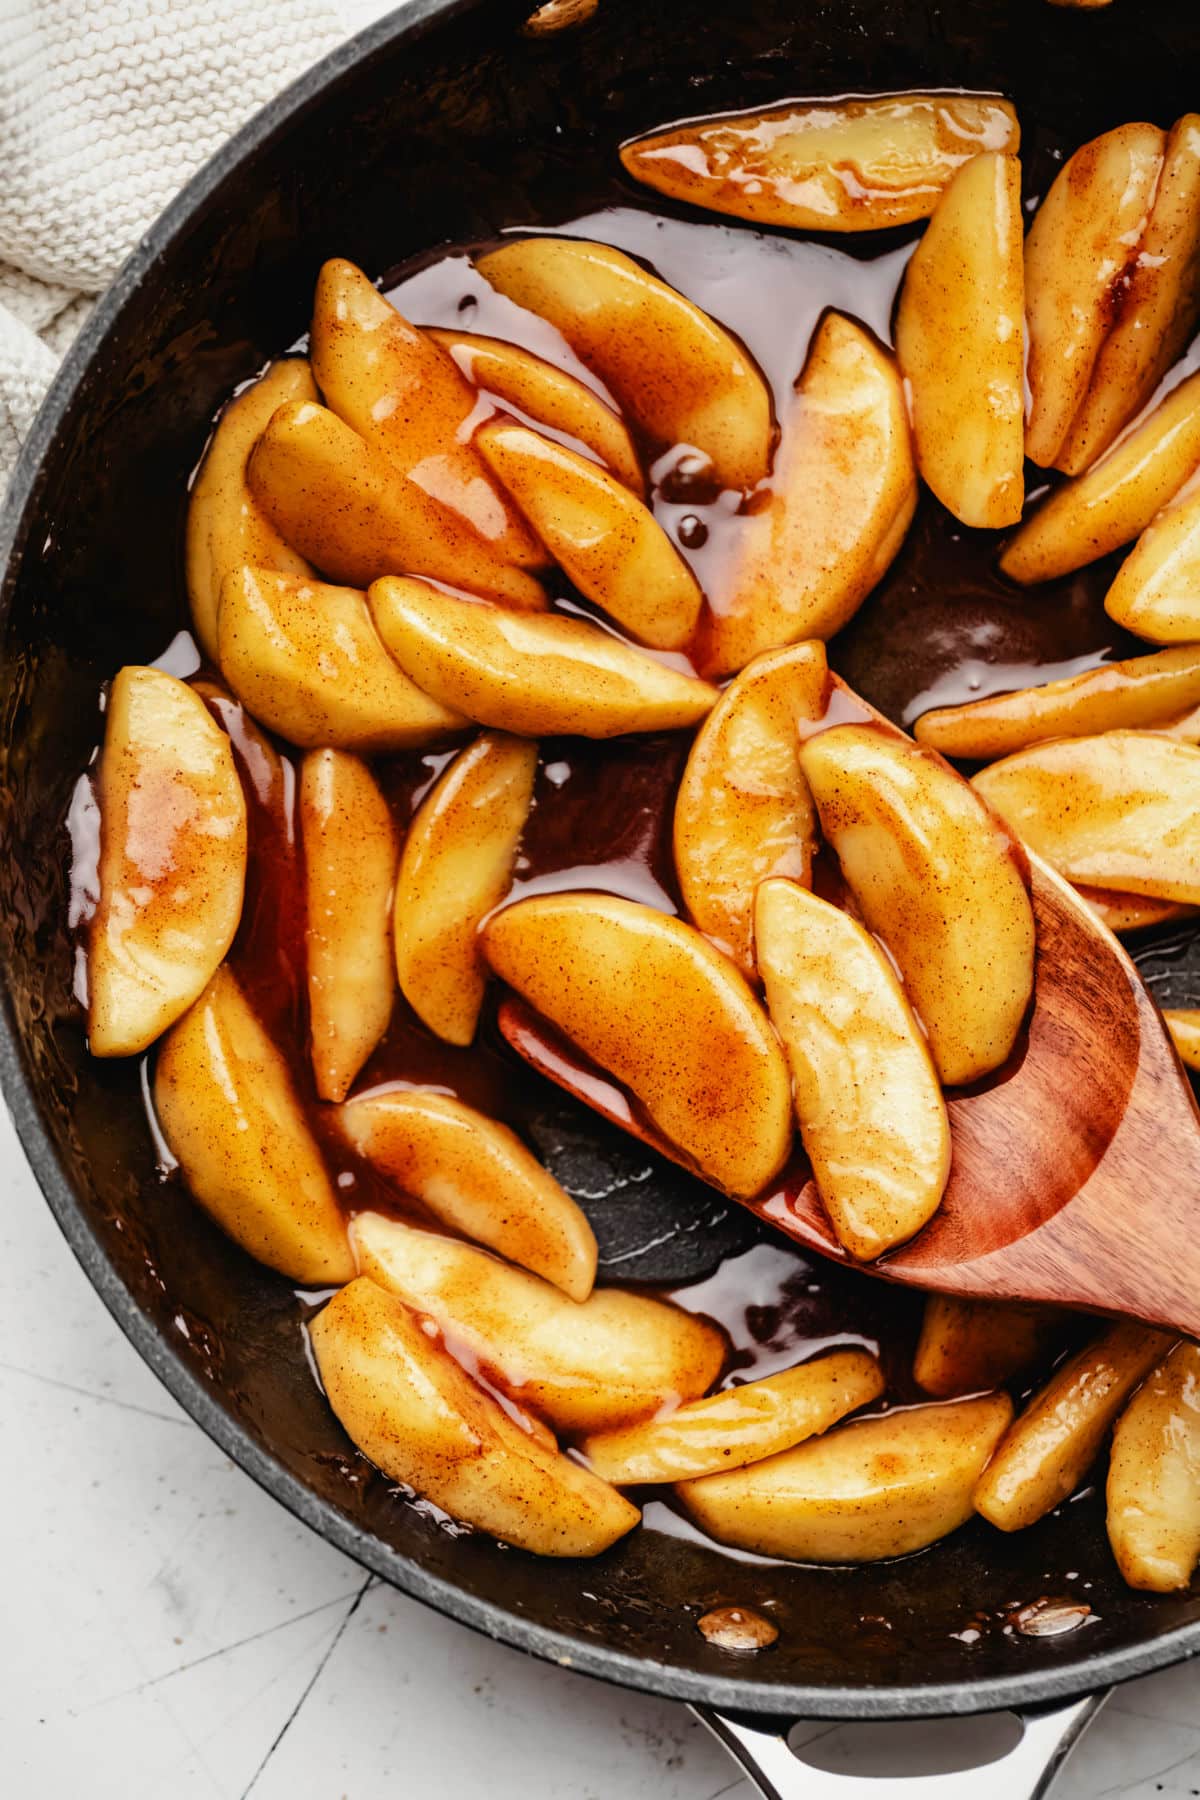 A wooden spoon scooping up cinnamon apples in a cast iron skillet.